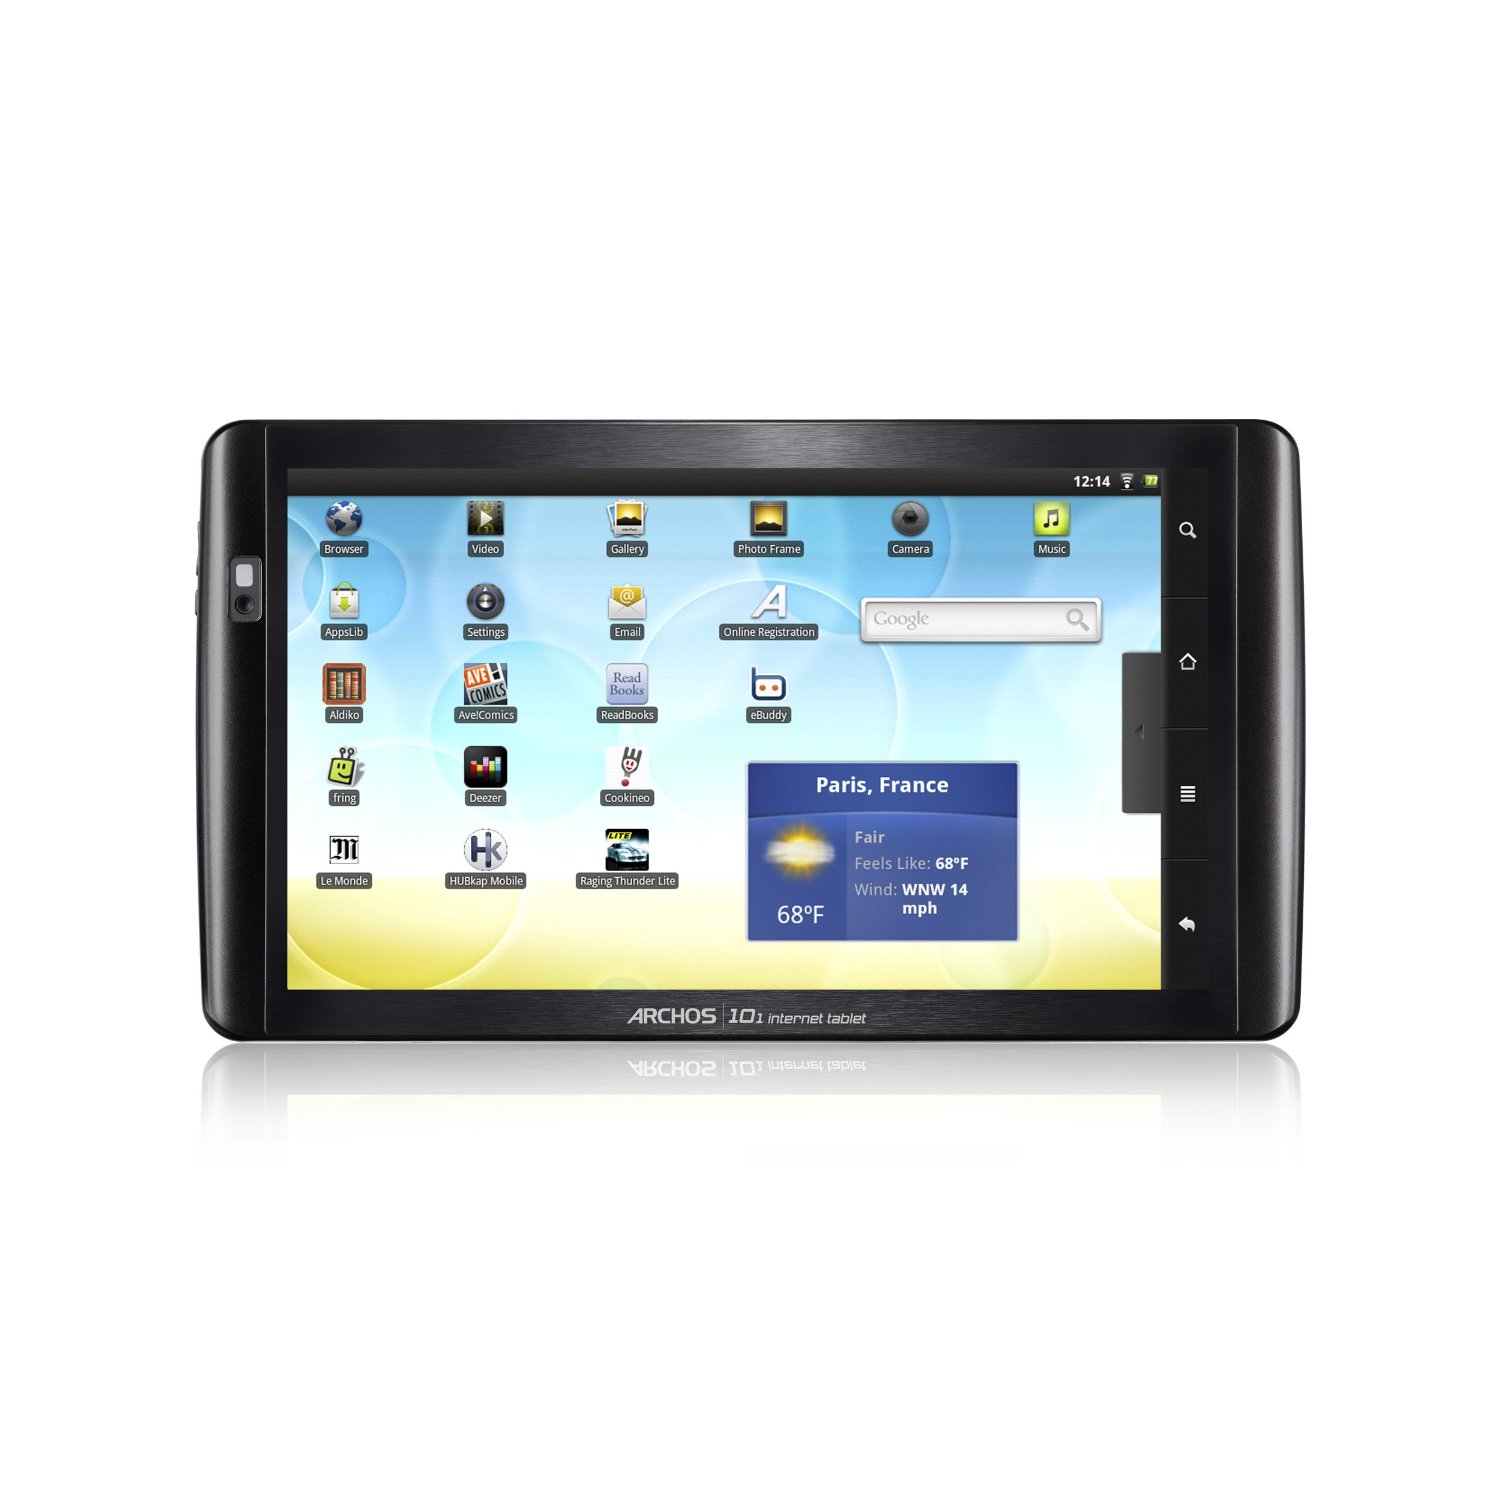 https://thetechjournal.com/wp-content/uploads/images/1110/1318017670-archos-101-android-powered-internet-tablet-2.jpg